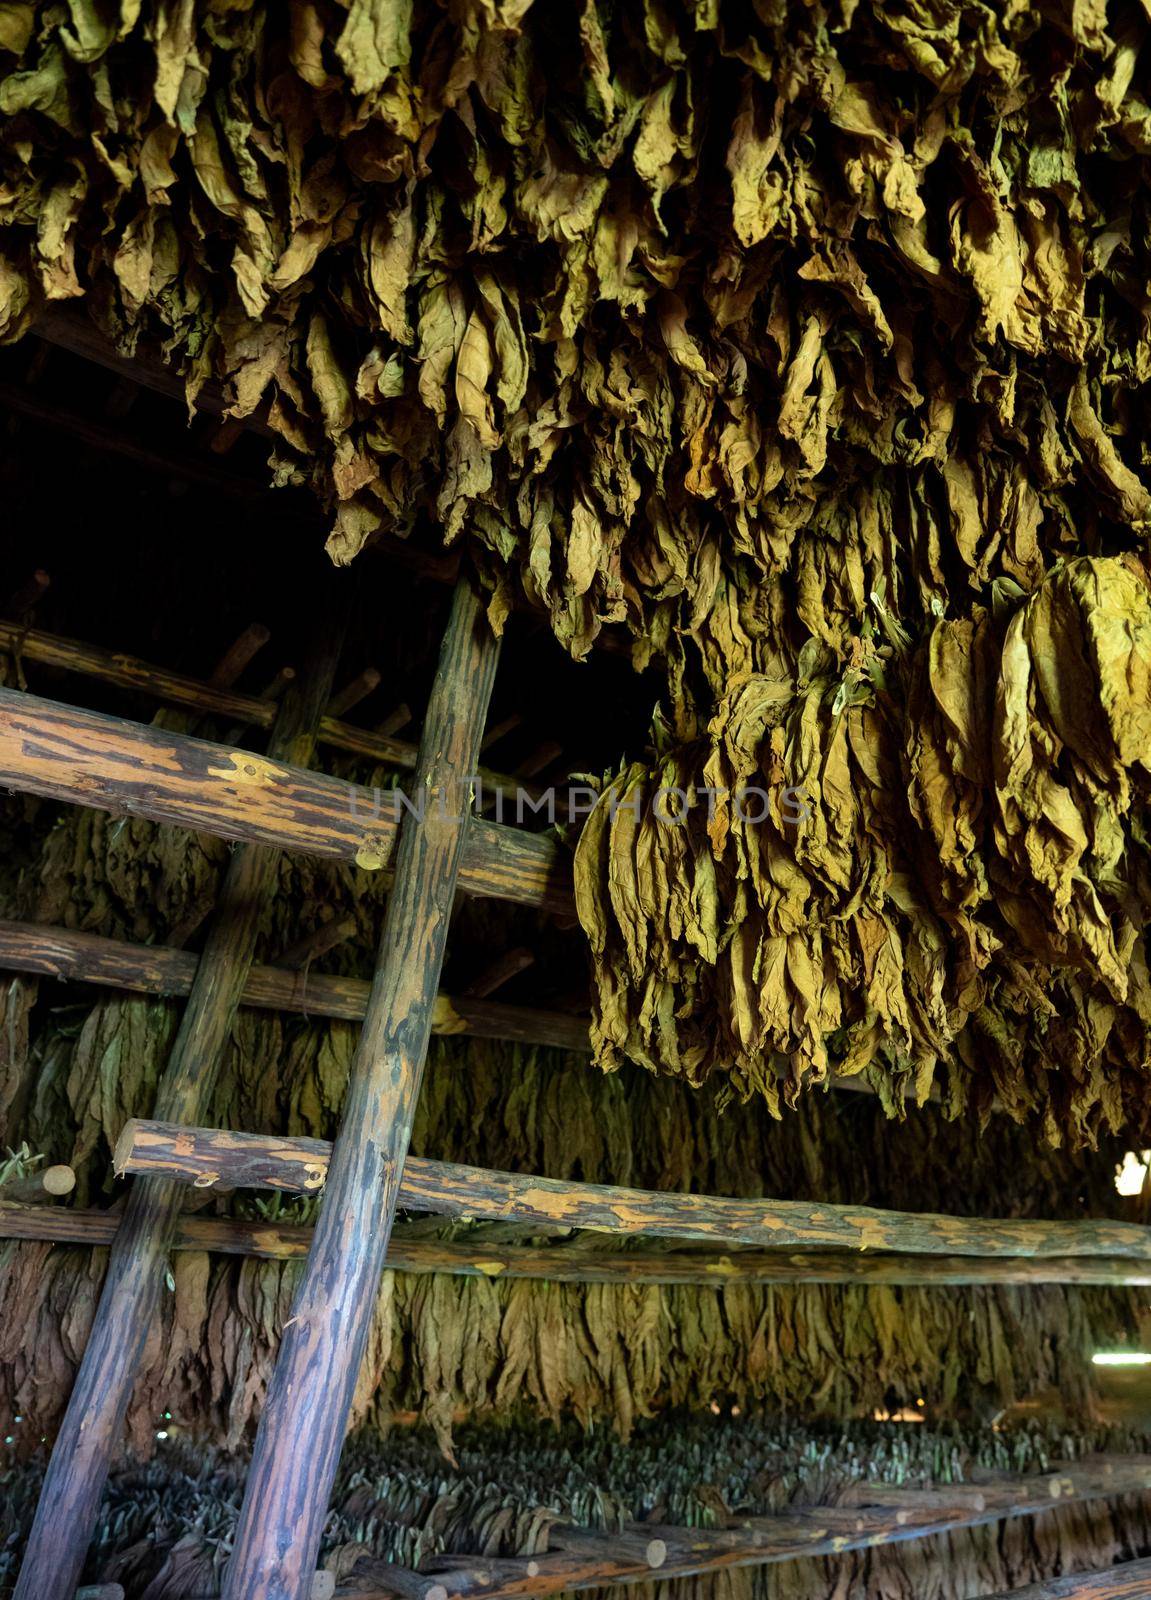 Tobacco drying, inside a shed or barn for drying tobacco leaves in Cuba by Arsgera